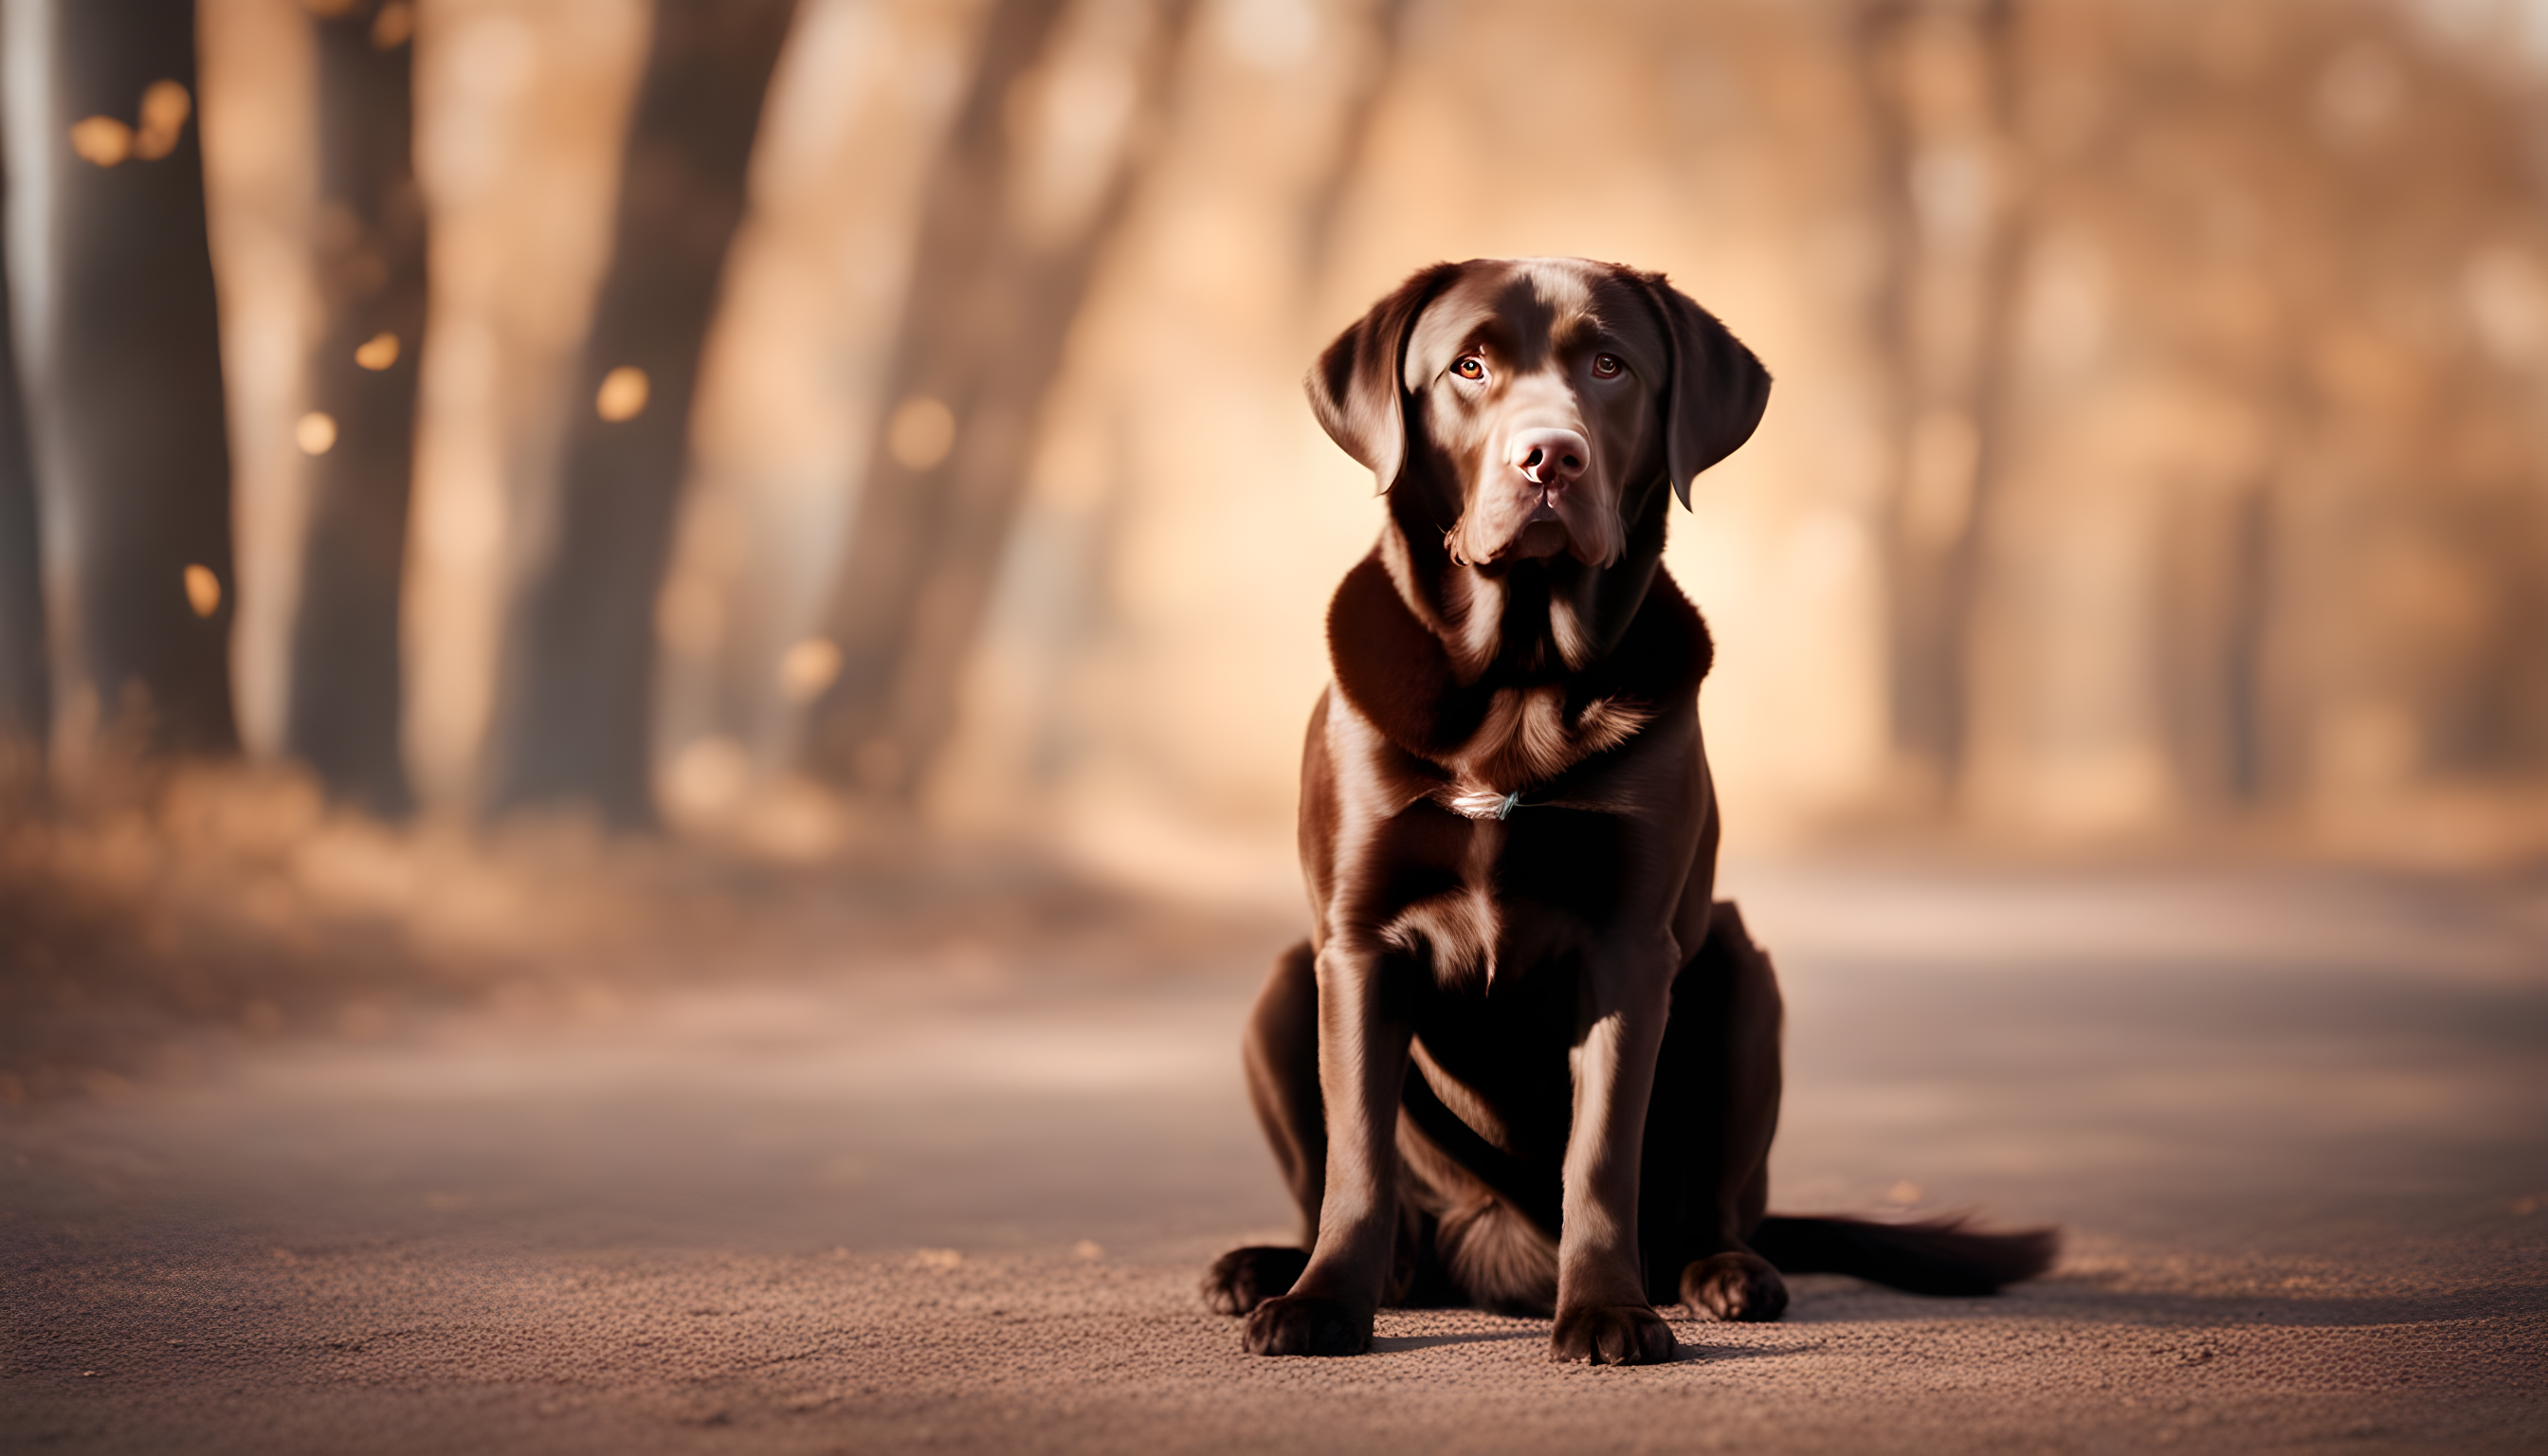 A well-groomed Chocolate Lab looking stylish and content, ready to show off its shiny coat and clean paws.